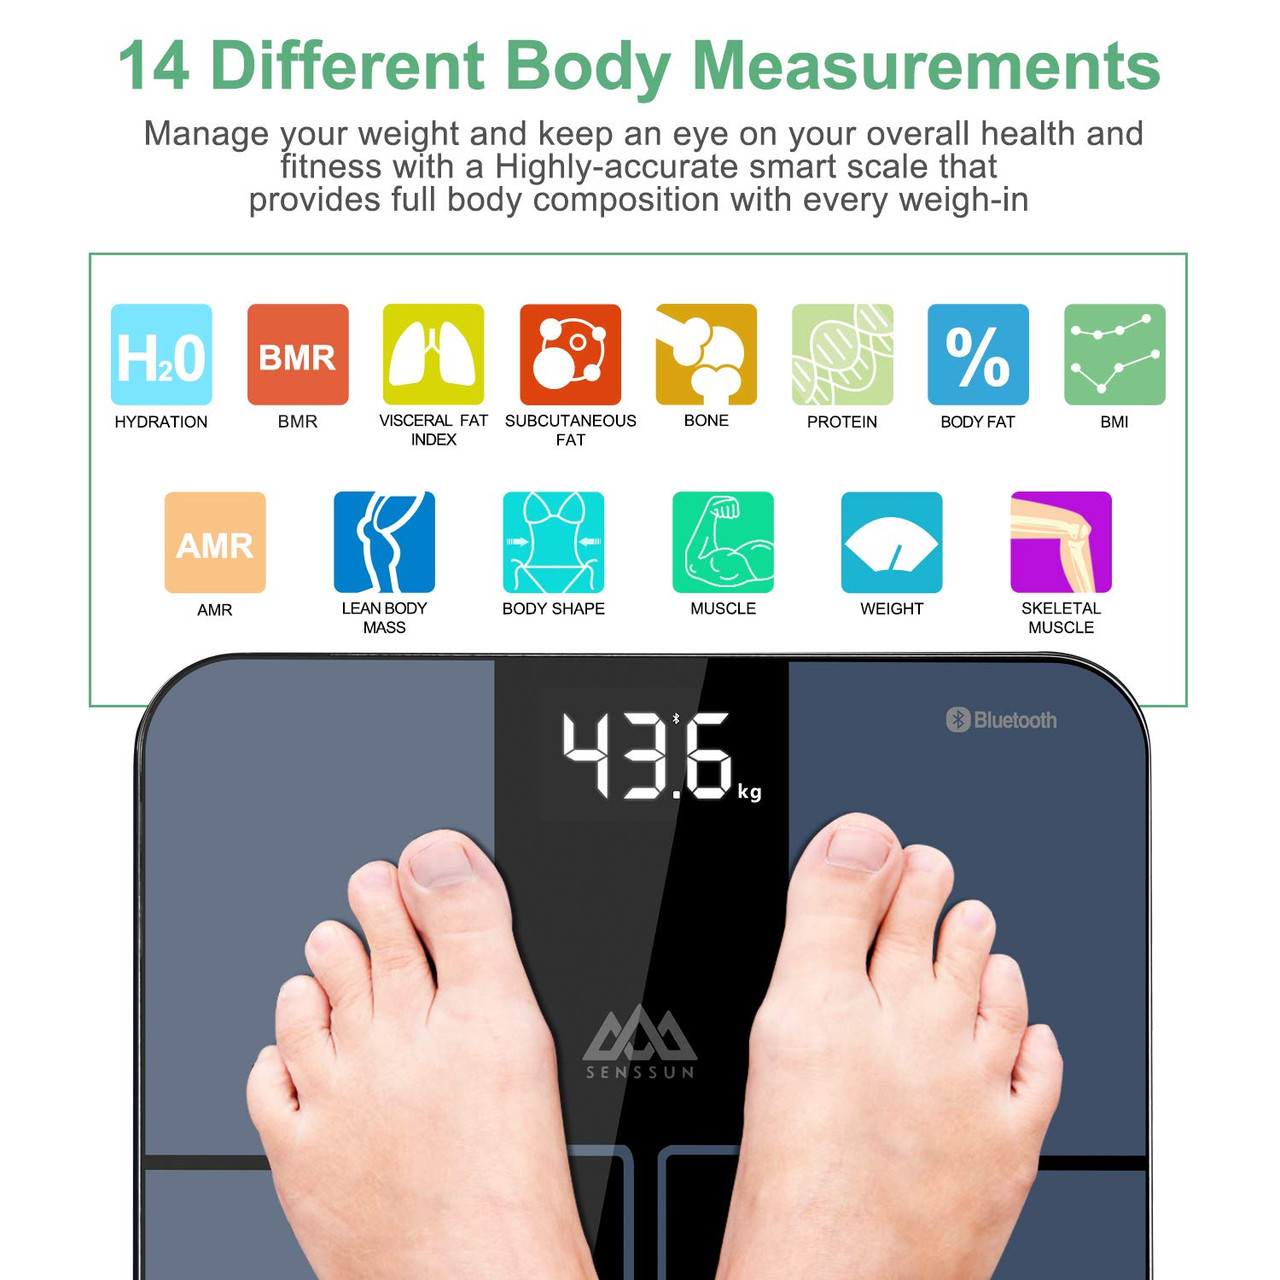 SENSSUN Bluetooth Body Fat BMI Scale, High Precision ITO Coating Bathroom  Weight Scale with Smartphone App